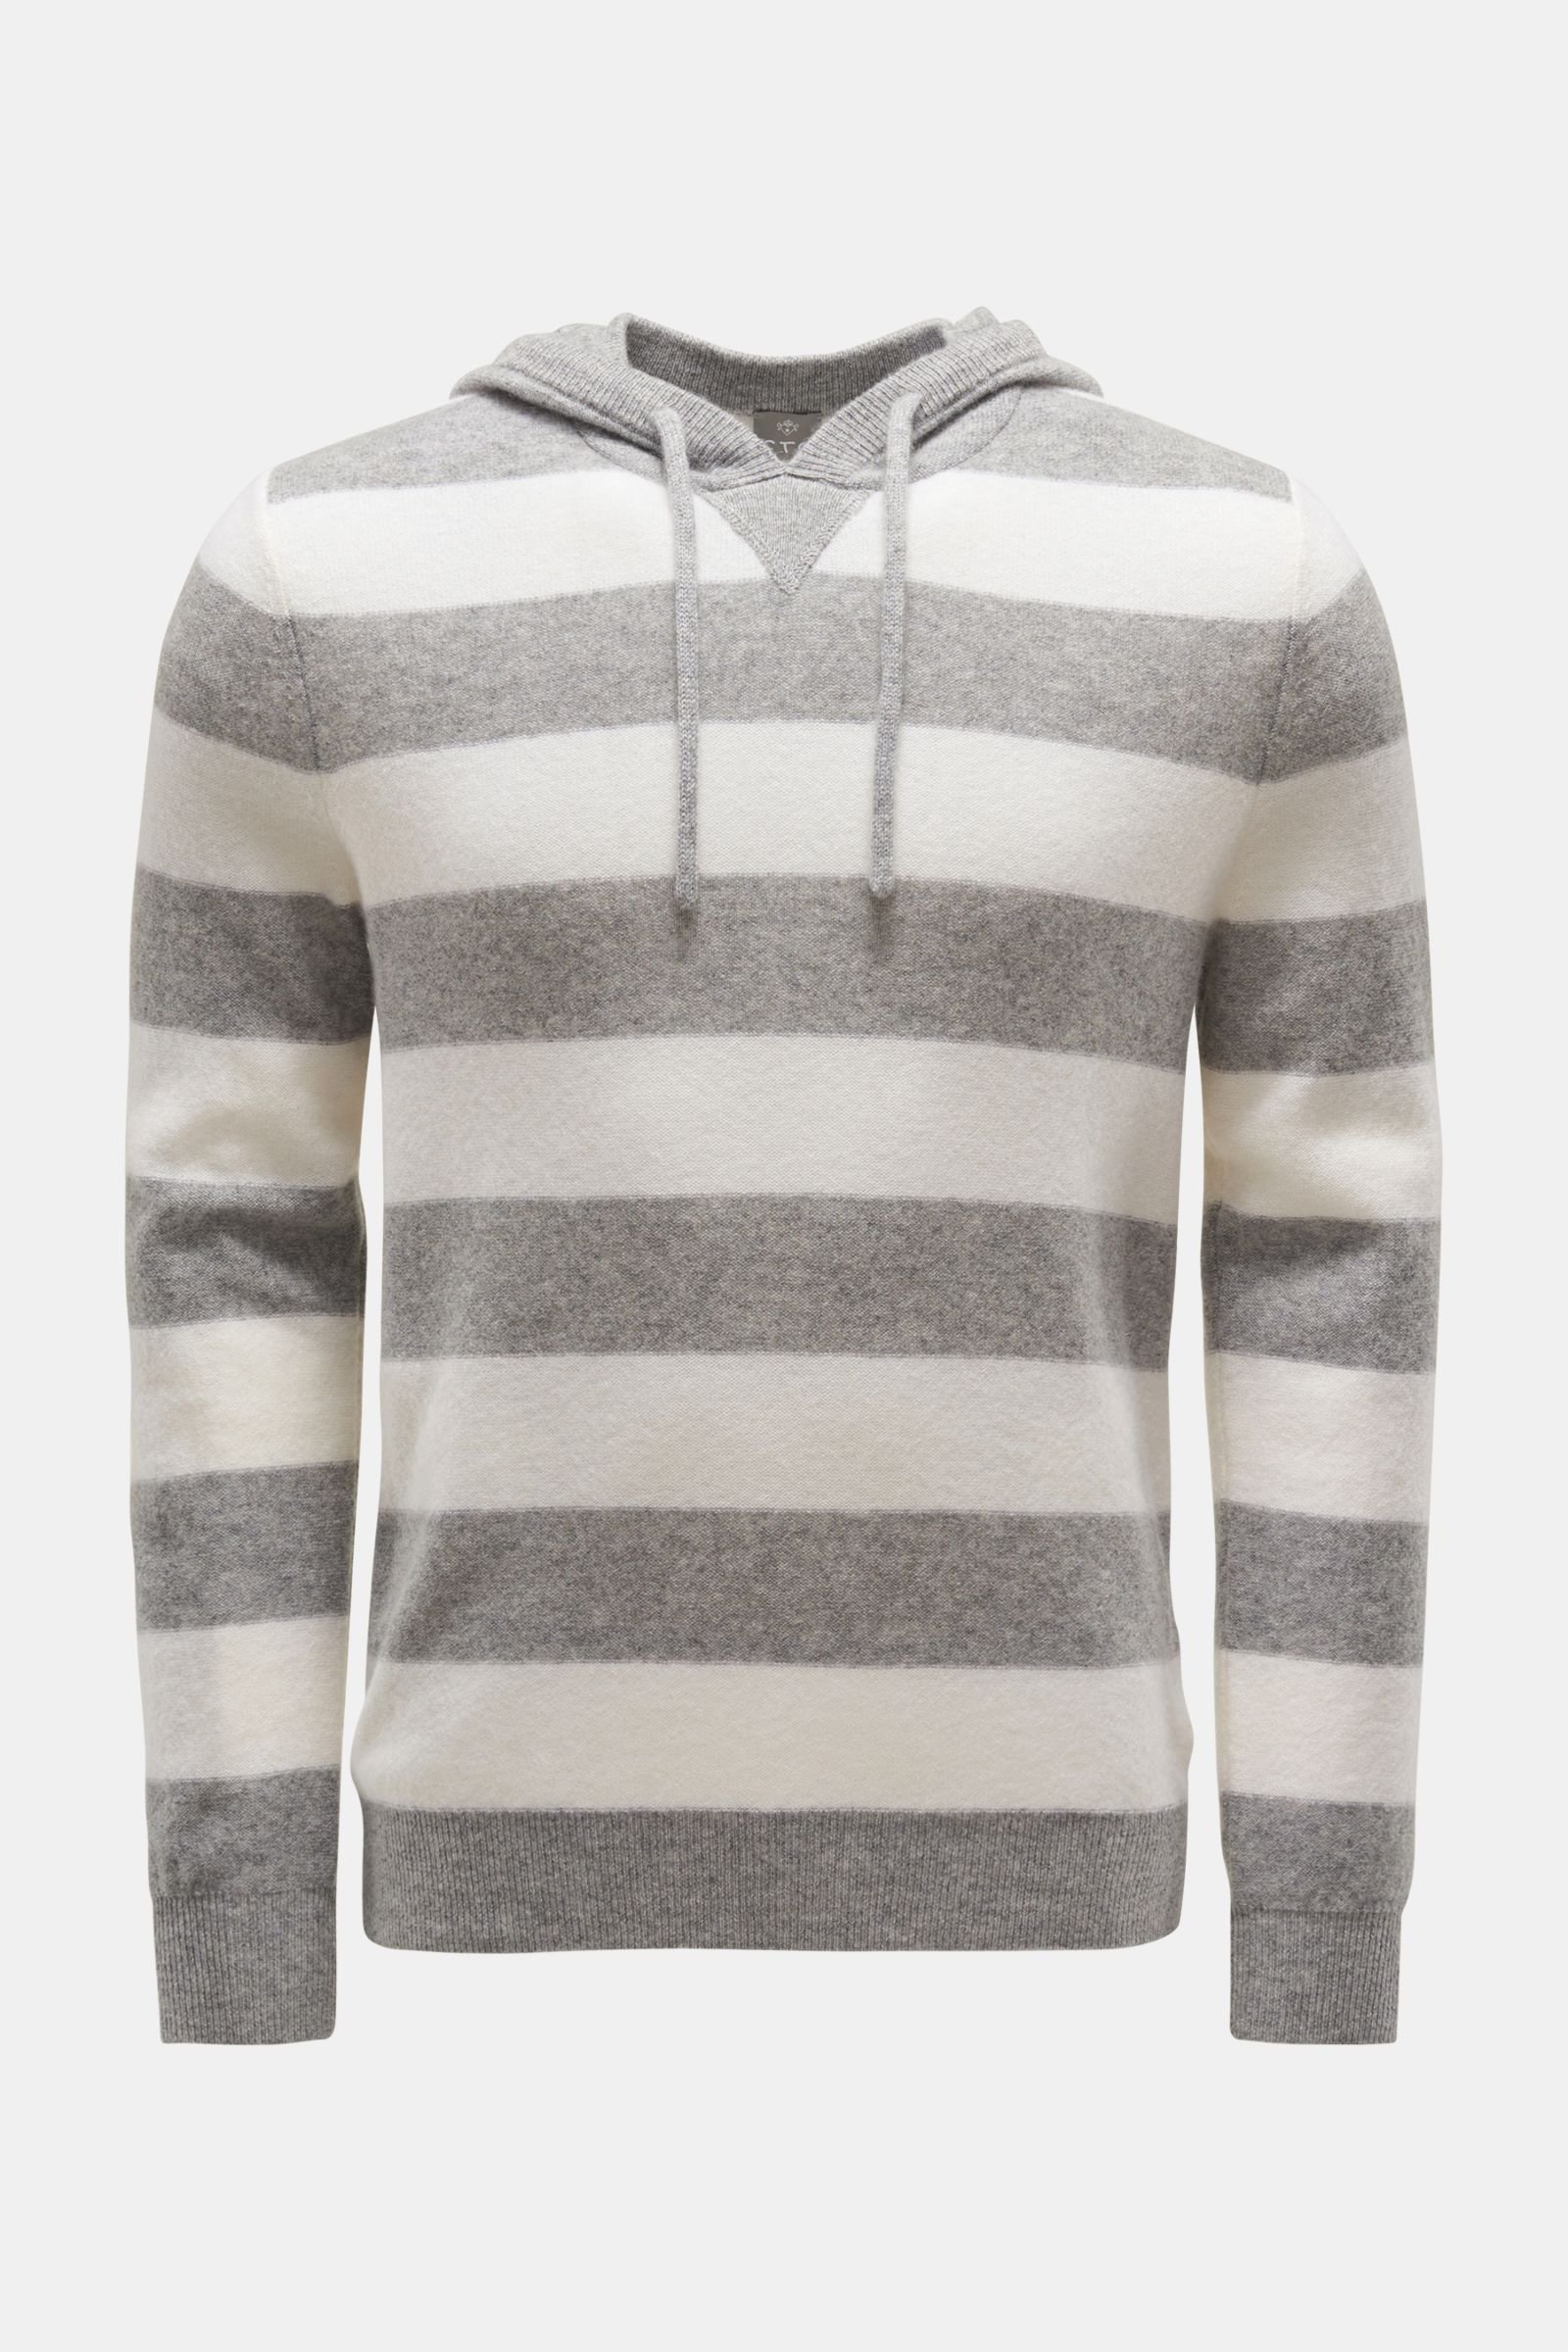 Cashmere hooded jumper grey/white striped